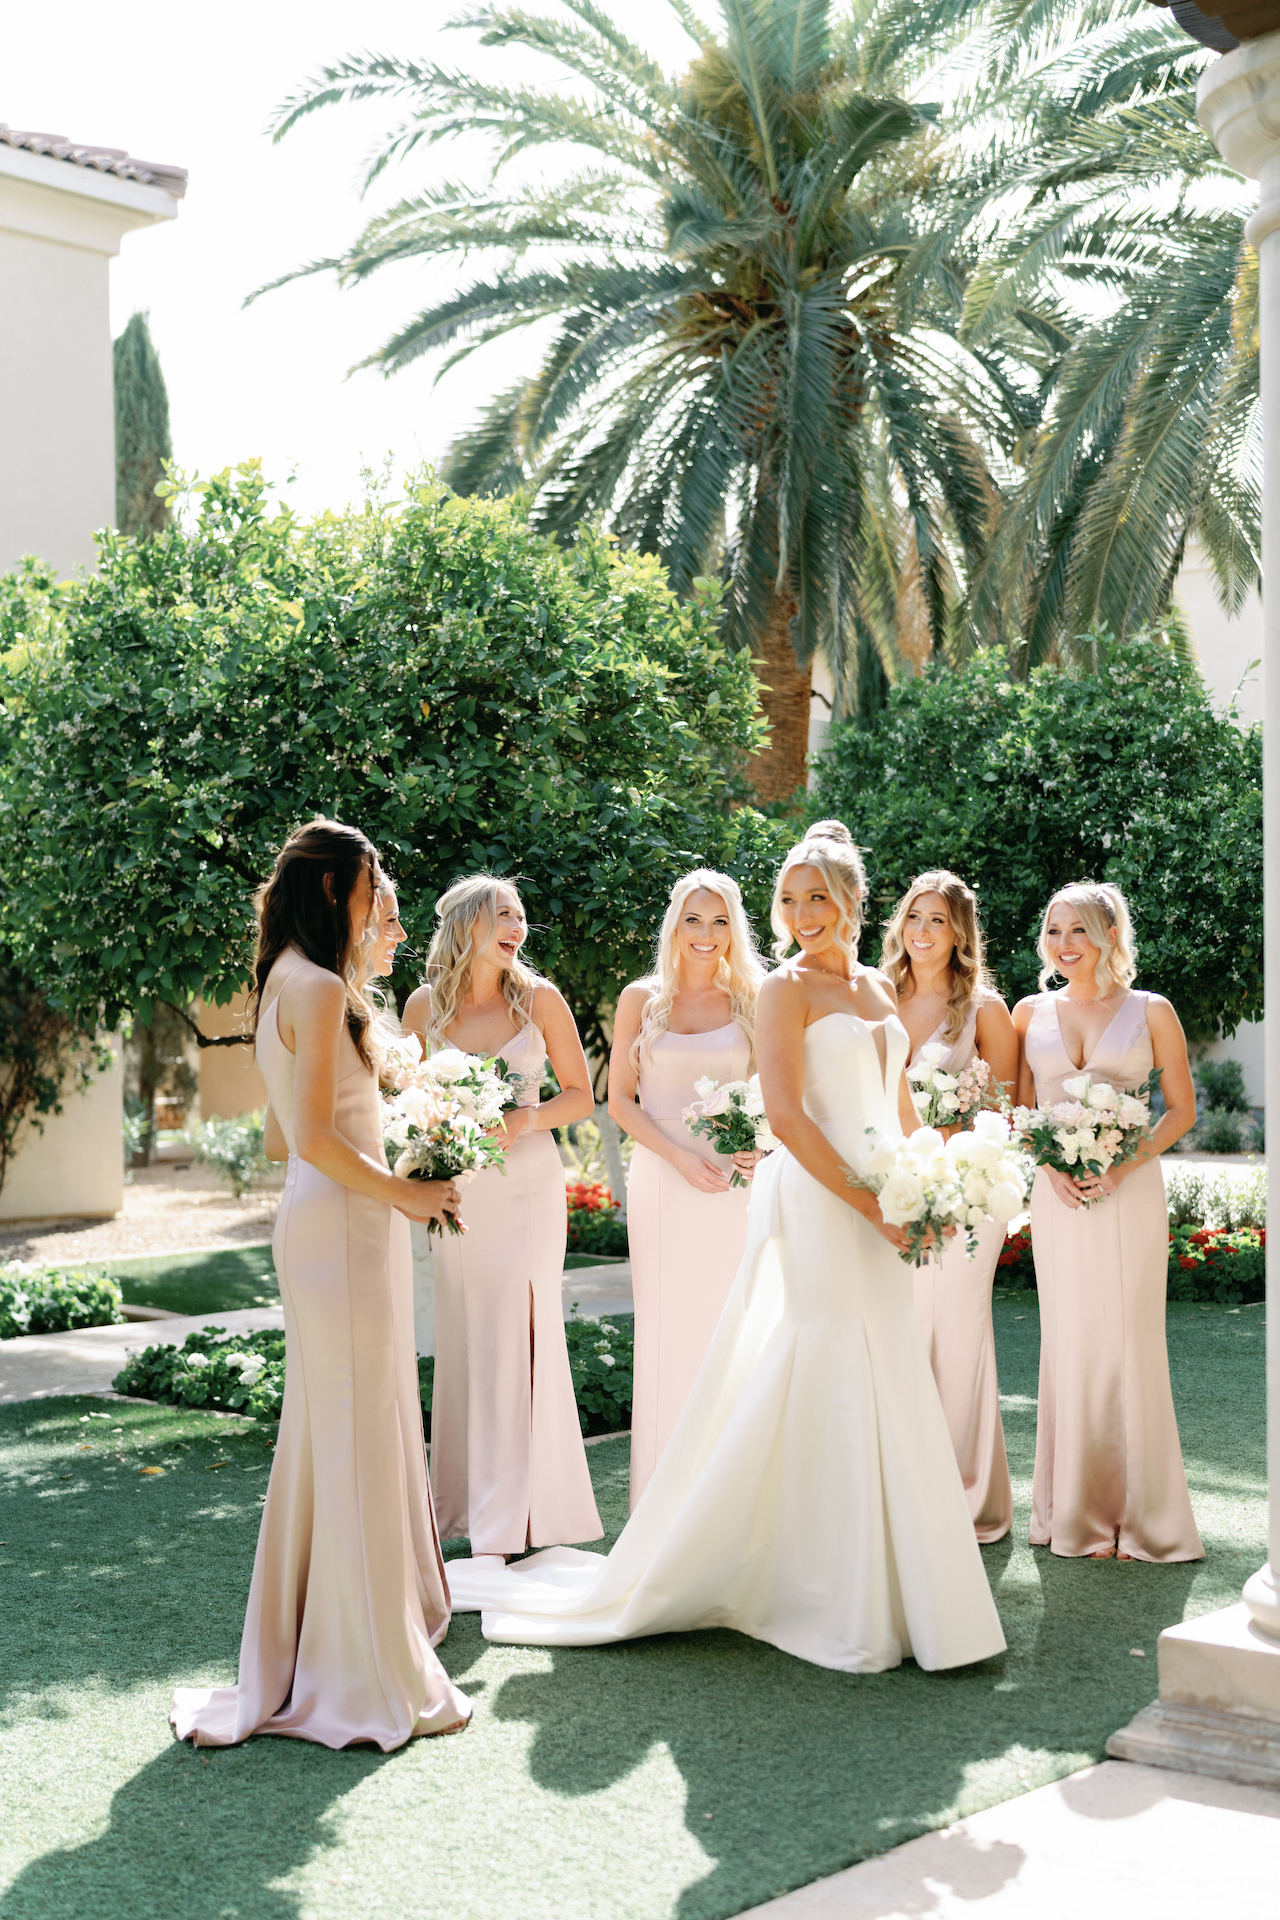 Bride with bridesmaids, all holding bouquets of flowers and smiling.